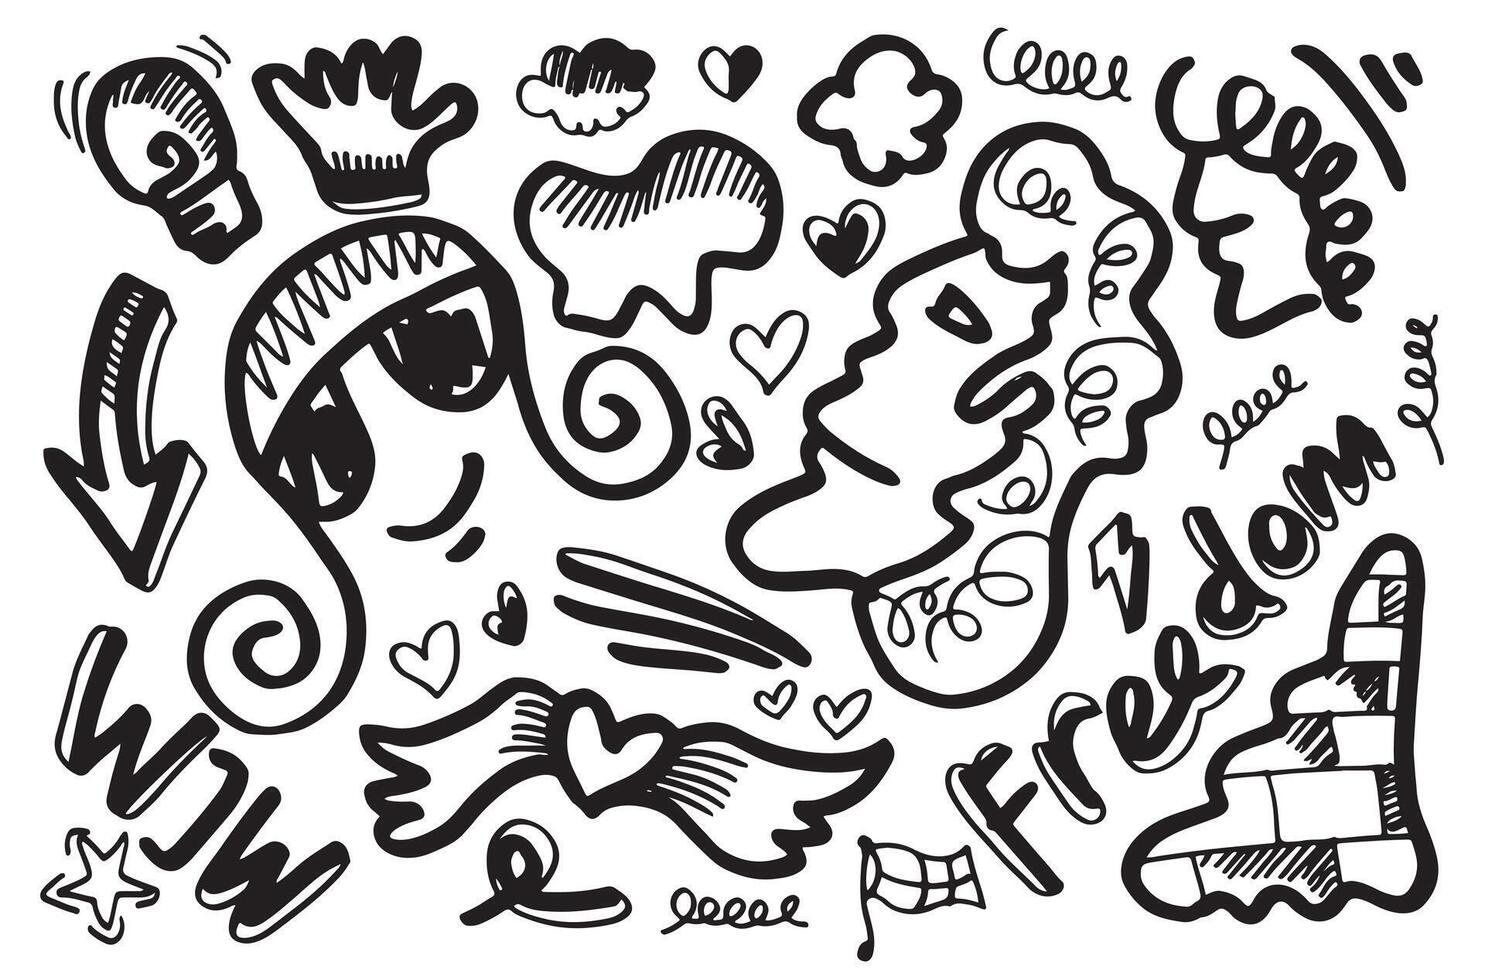 Hand drawn various black and white shapes and doodle objects. Abstract vector illustration.